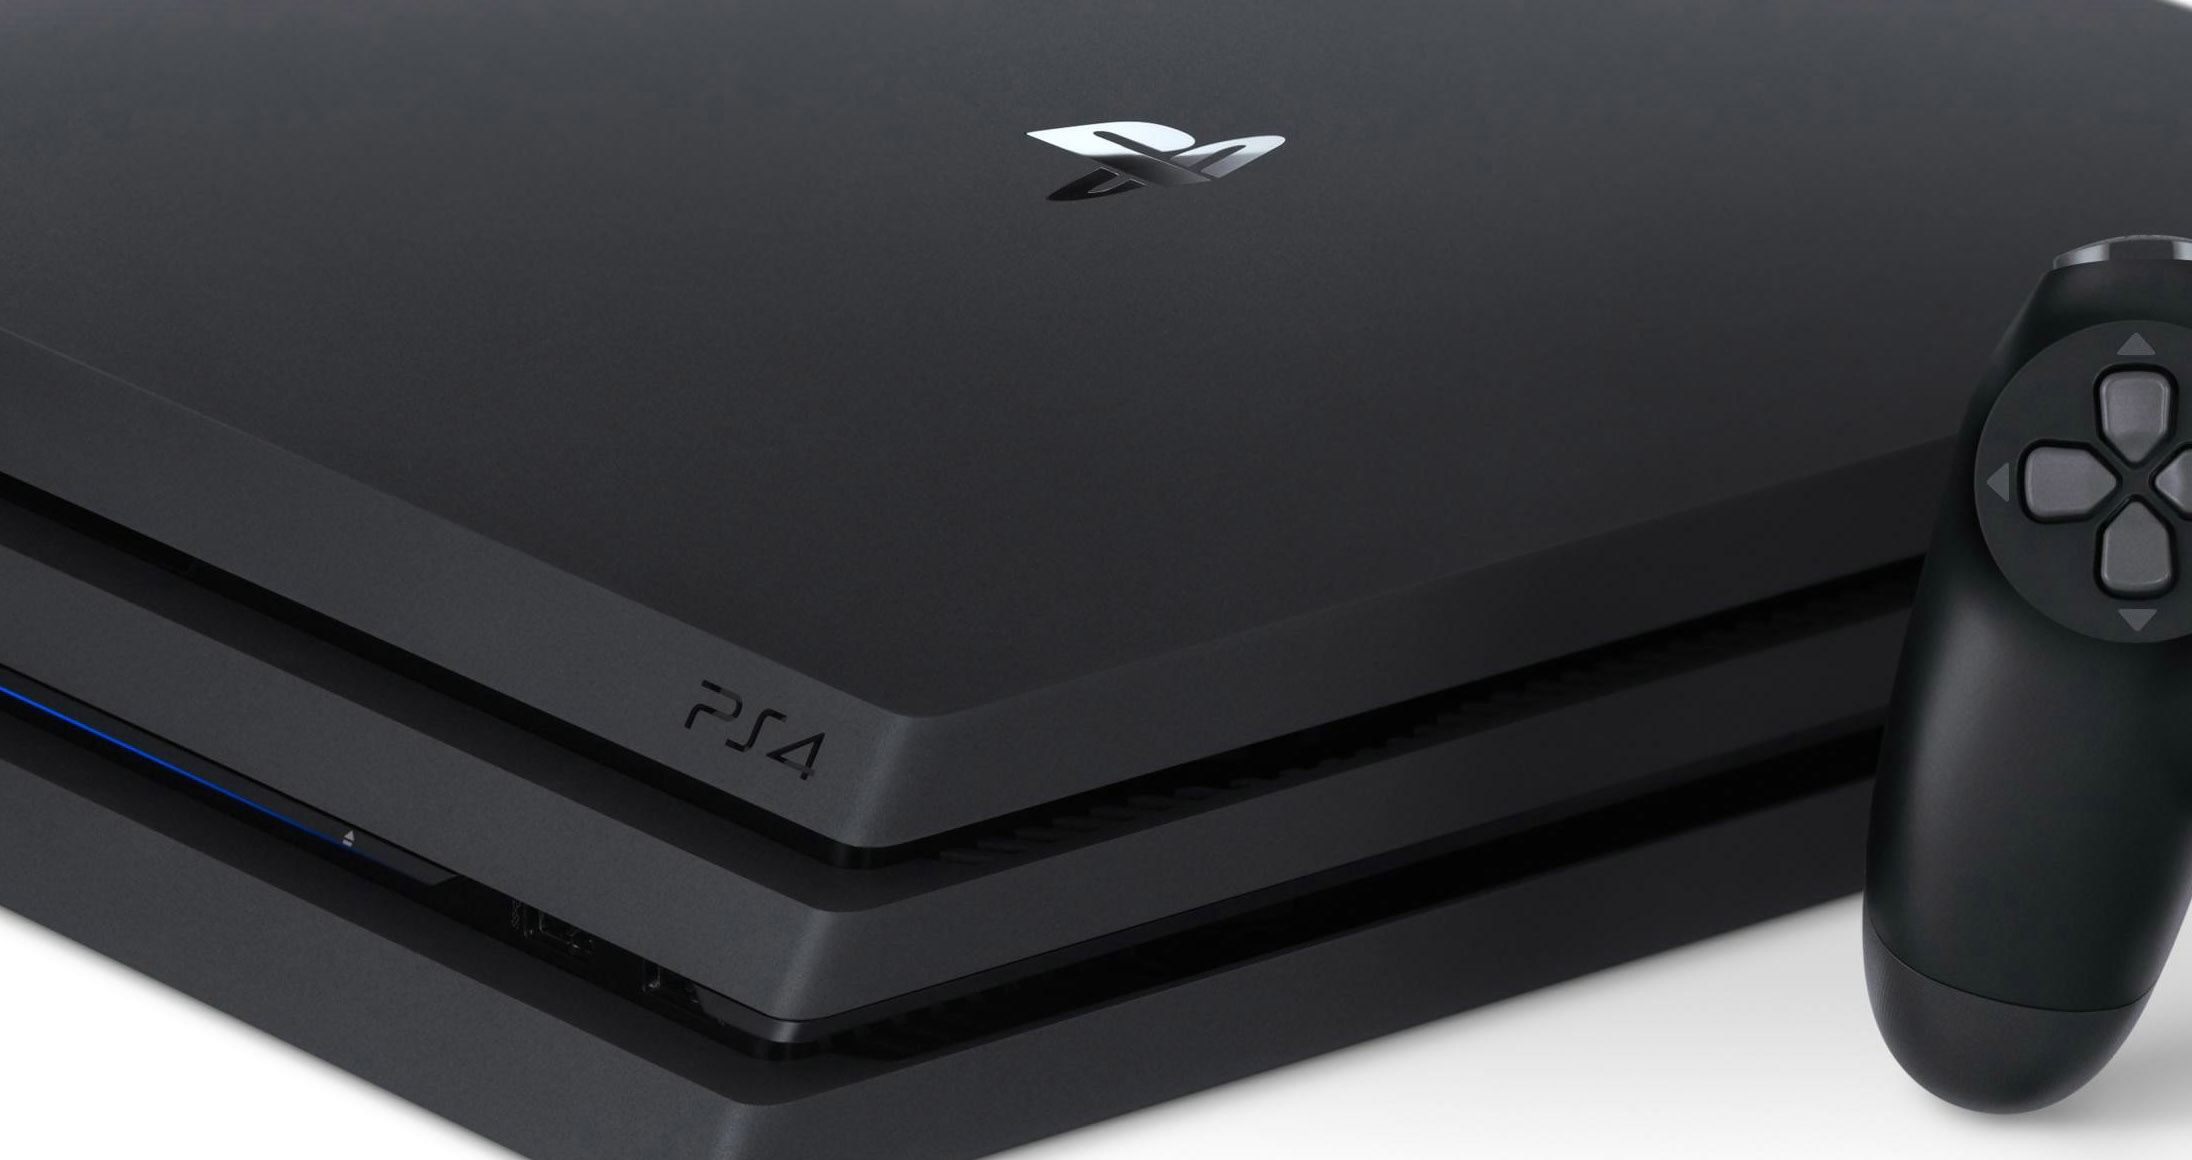 PS4: Firmware update 9.03 is available for download